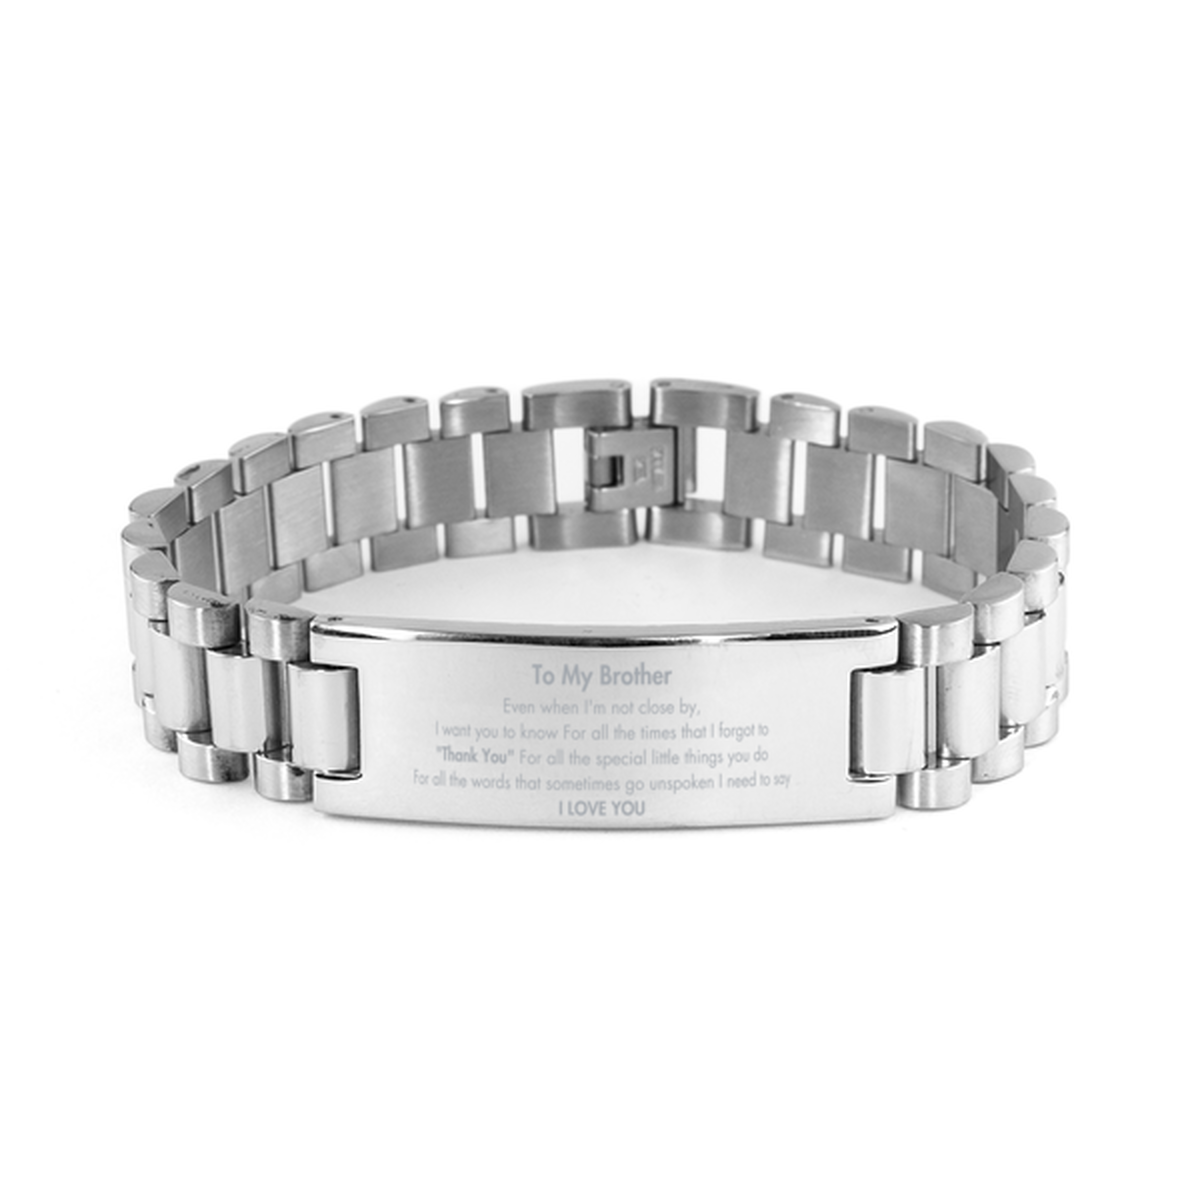 Thank You Gifts for Brother, Keepsake Ladder Stainless Steel Bracelet Gifts for Brother Birthday Mother's day Father's Day Brother For all the words That sometimes go unspoken I need to say I LOVE YOU